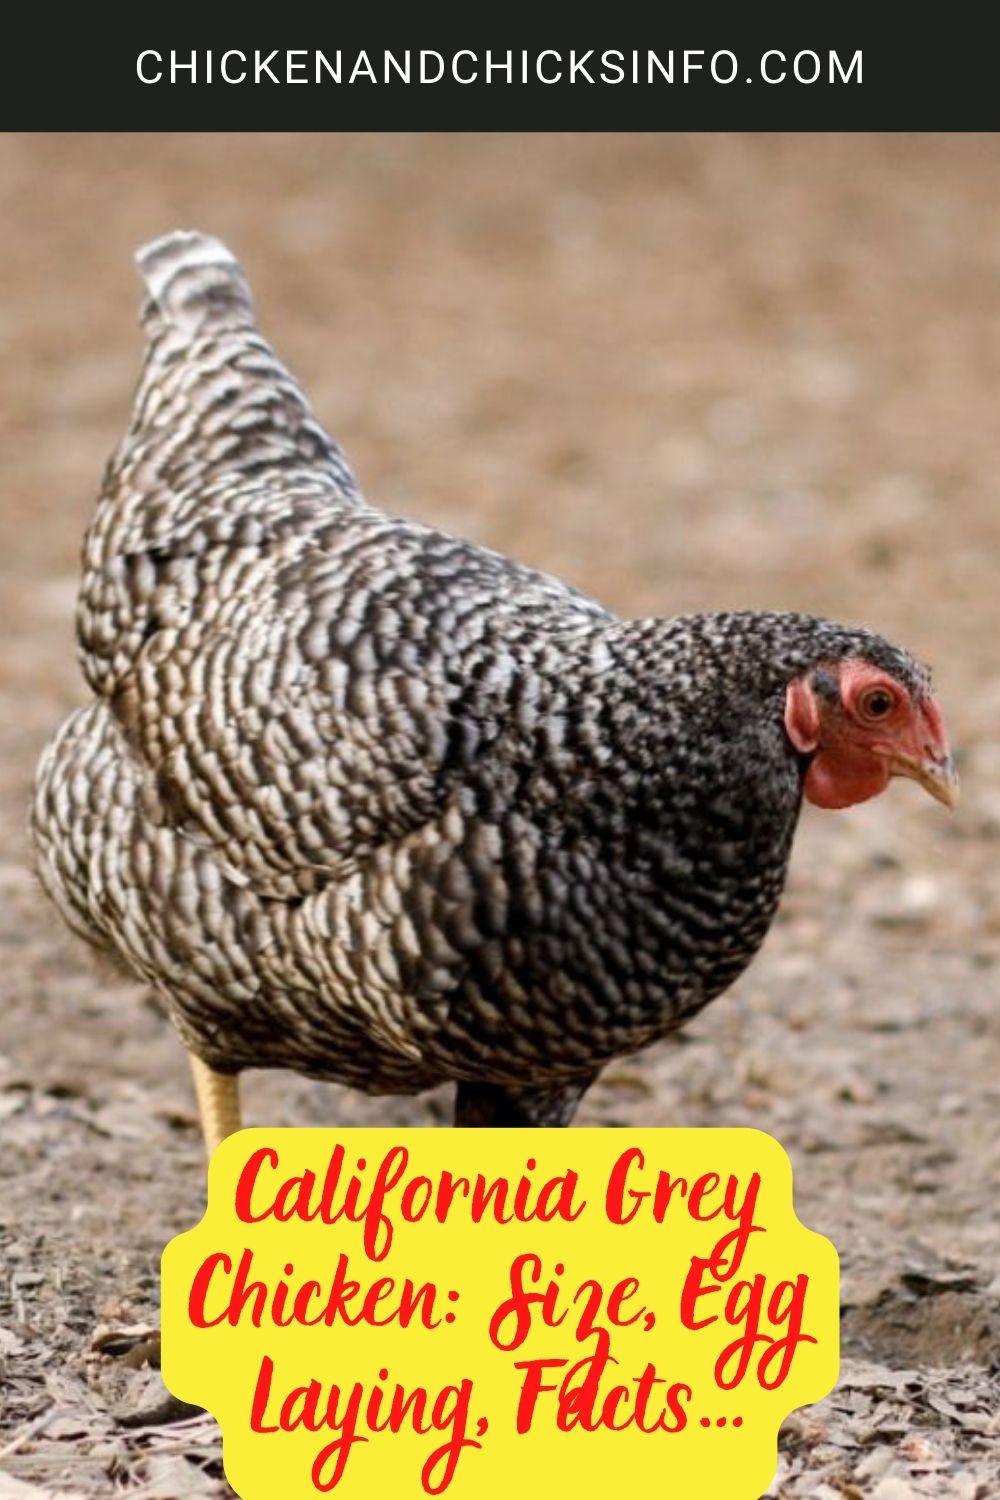 California Grey Chicken: Size, Egg Laying, Facts… poster.
